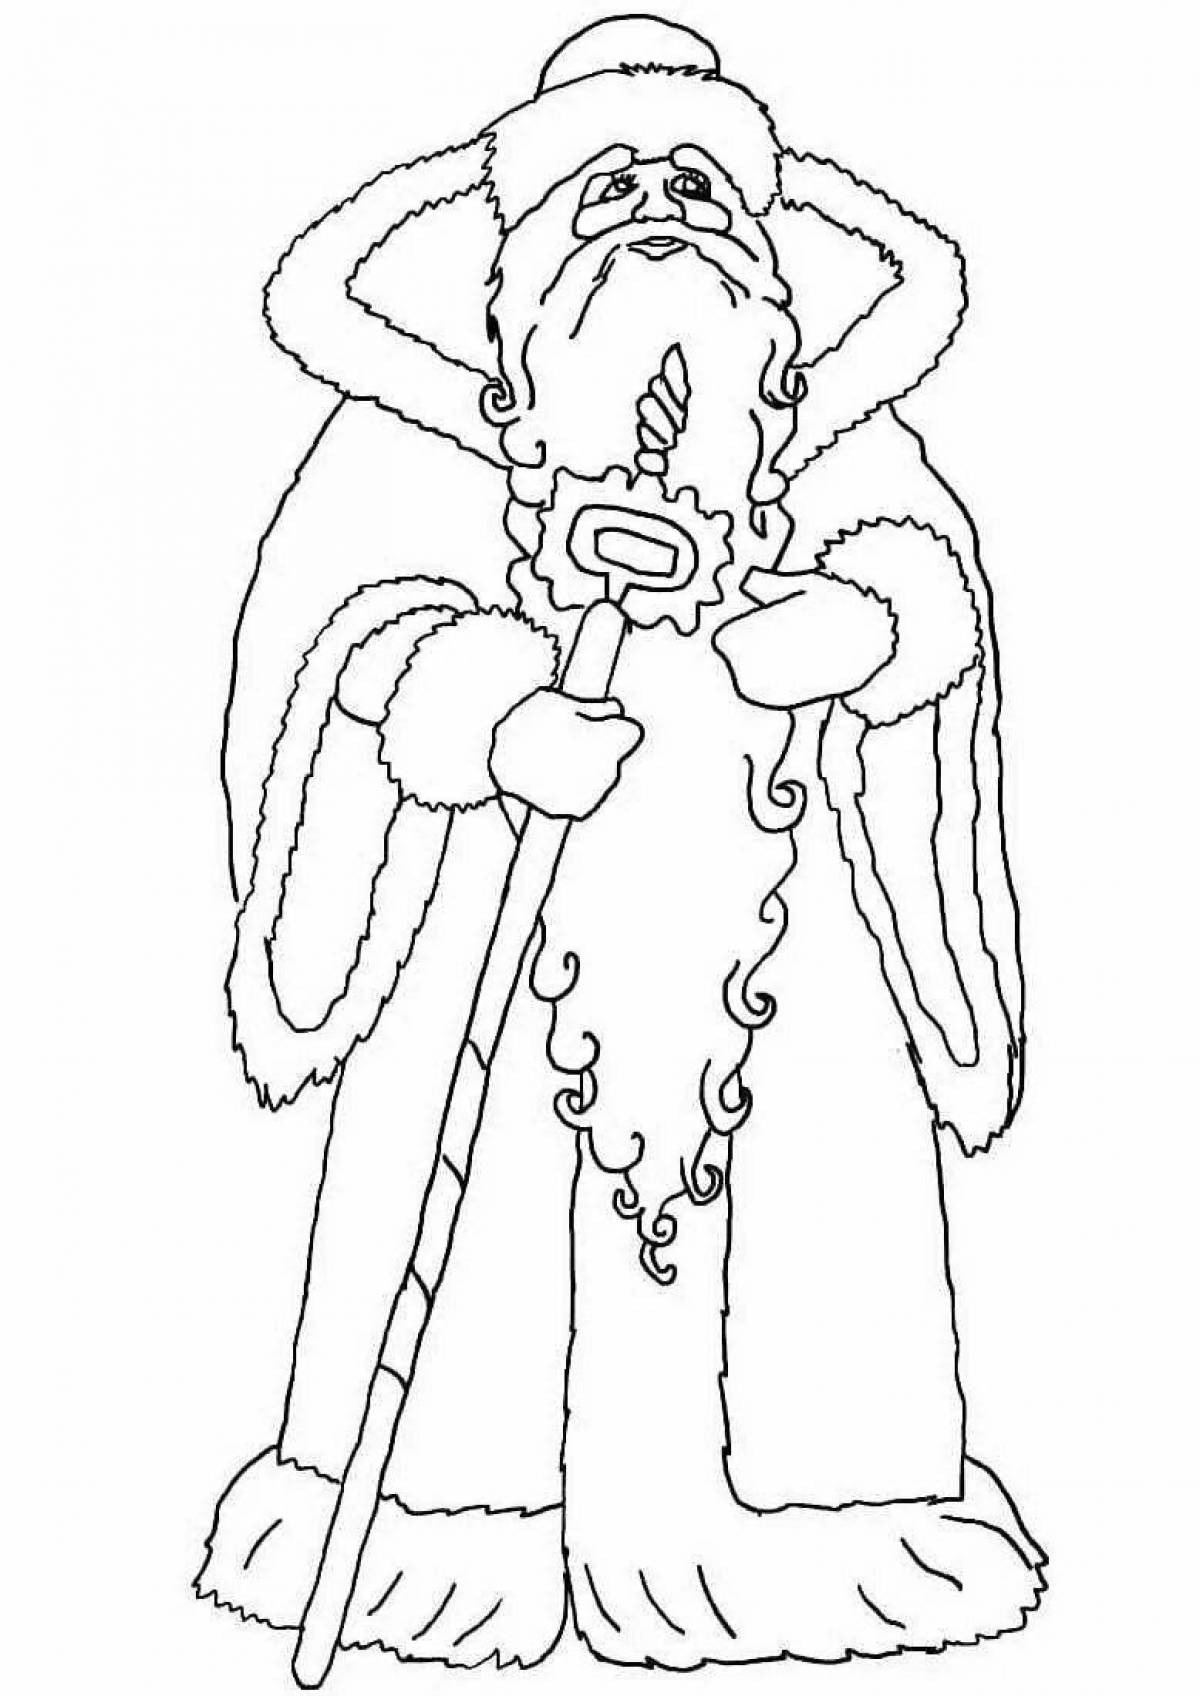 Glorious Governor Frost Coloring Page